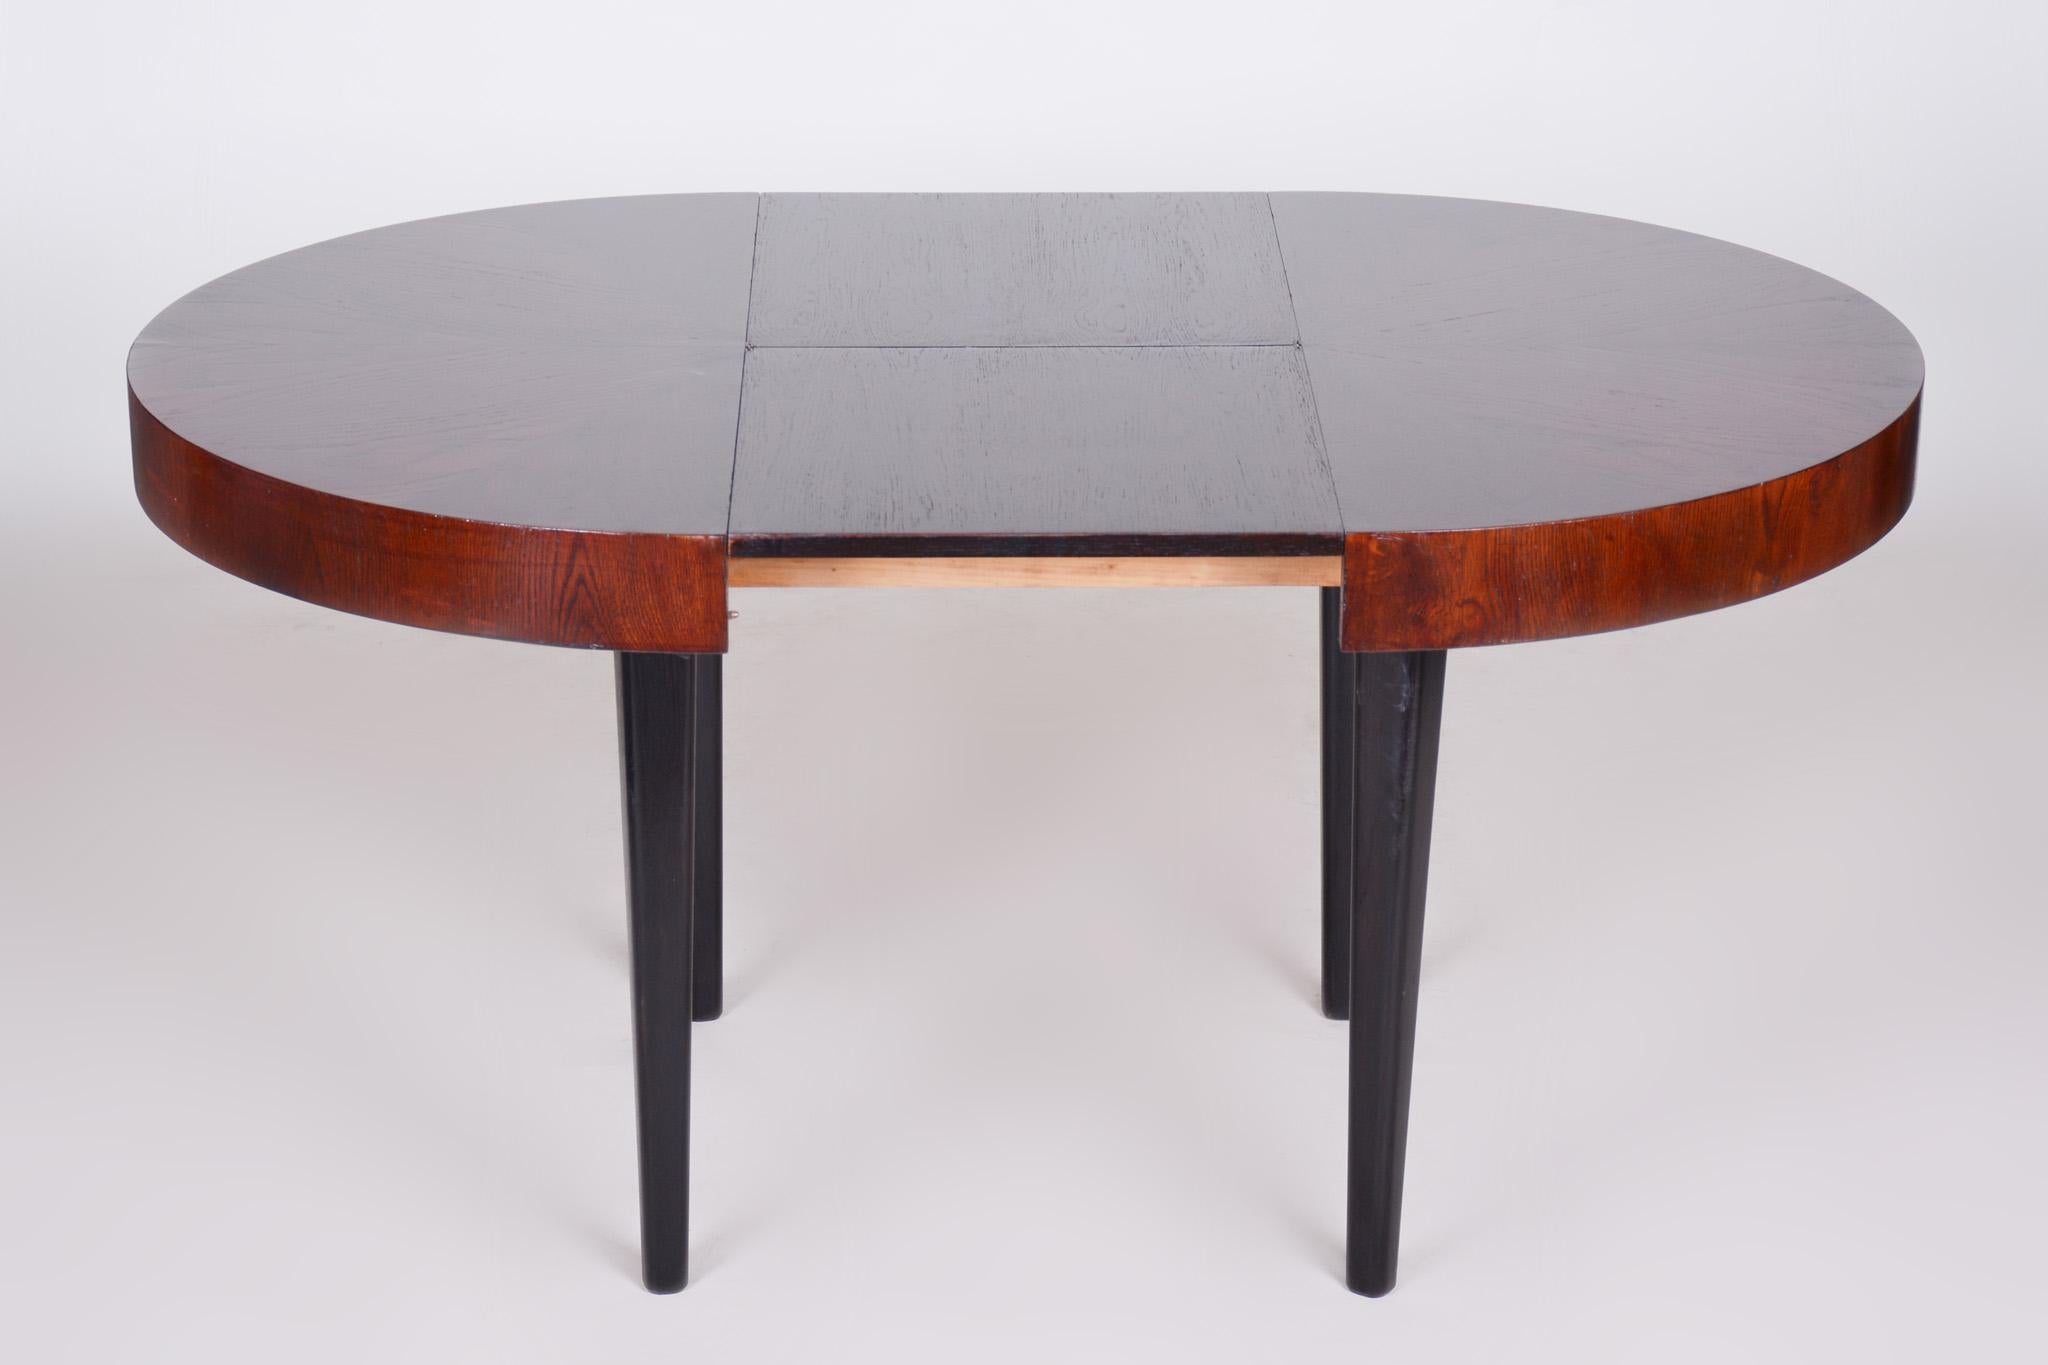 Mid-20th Century Fully Restored Art Deco Dining Table Made in the 1940s in Czechia, Beech and Oak